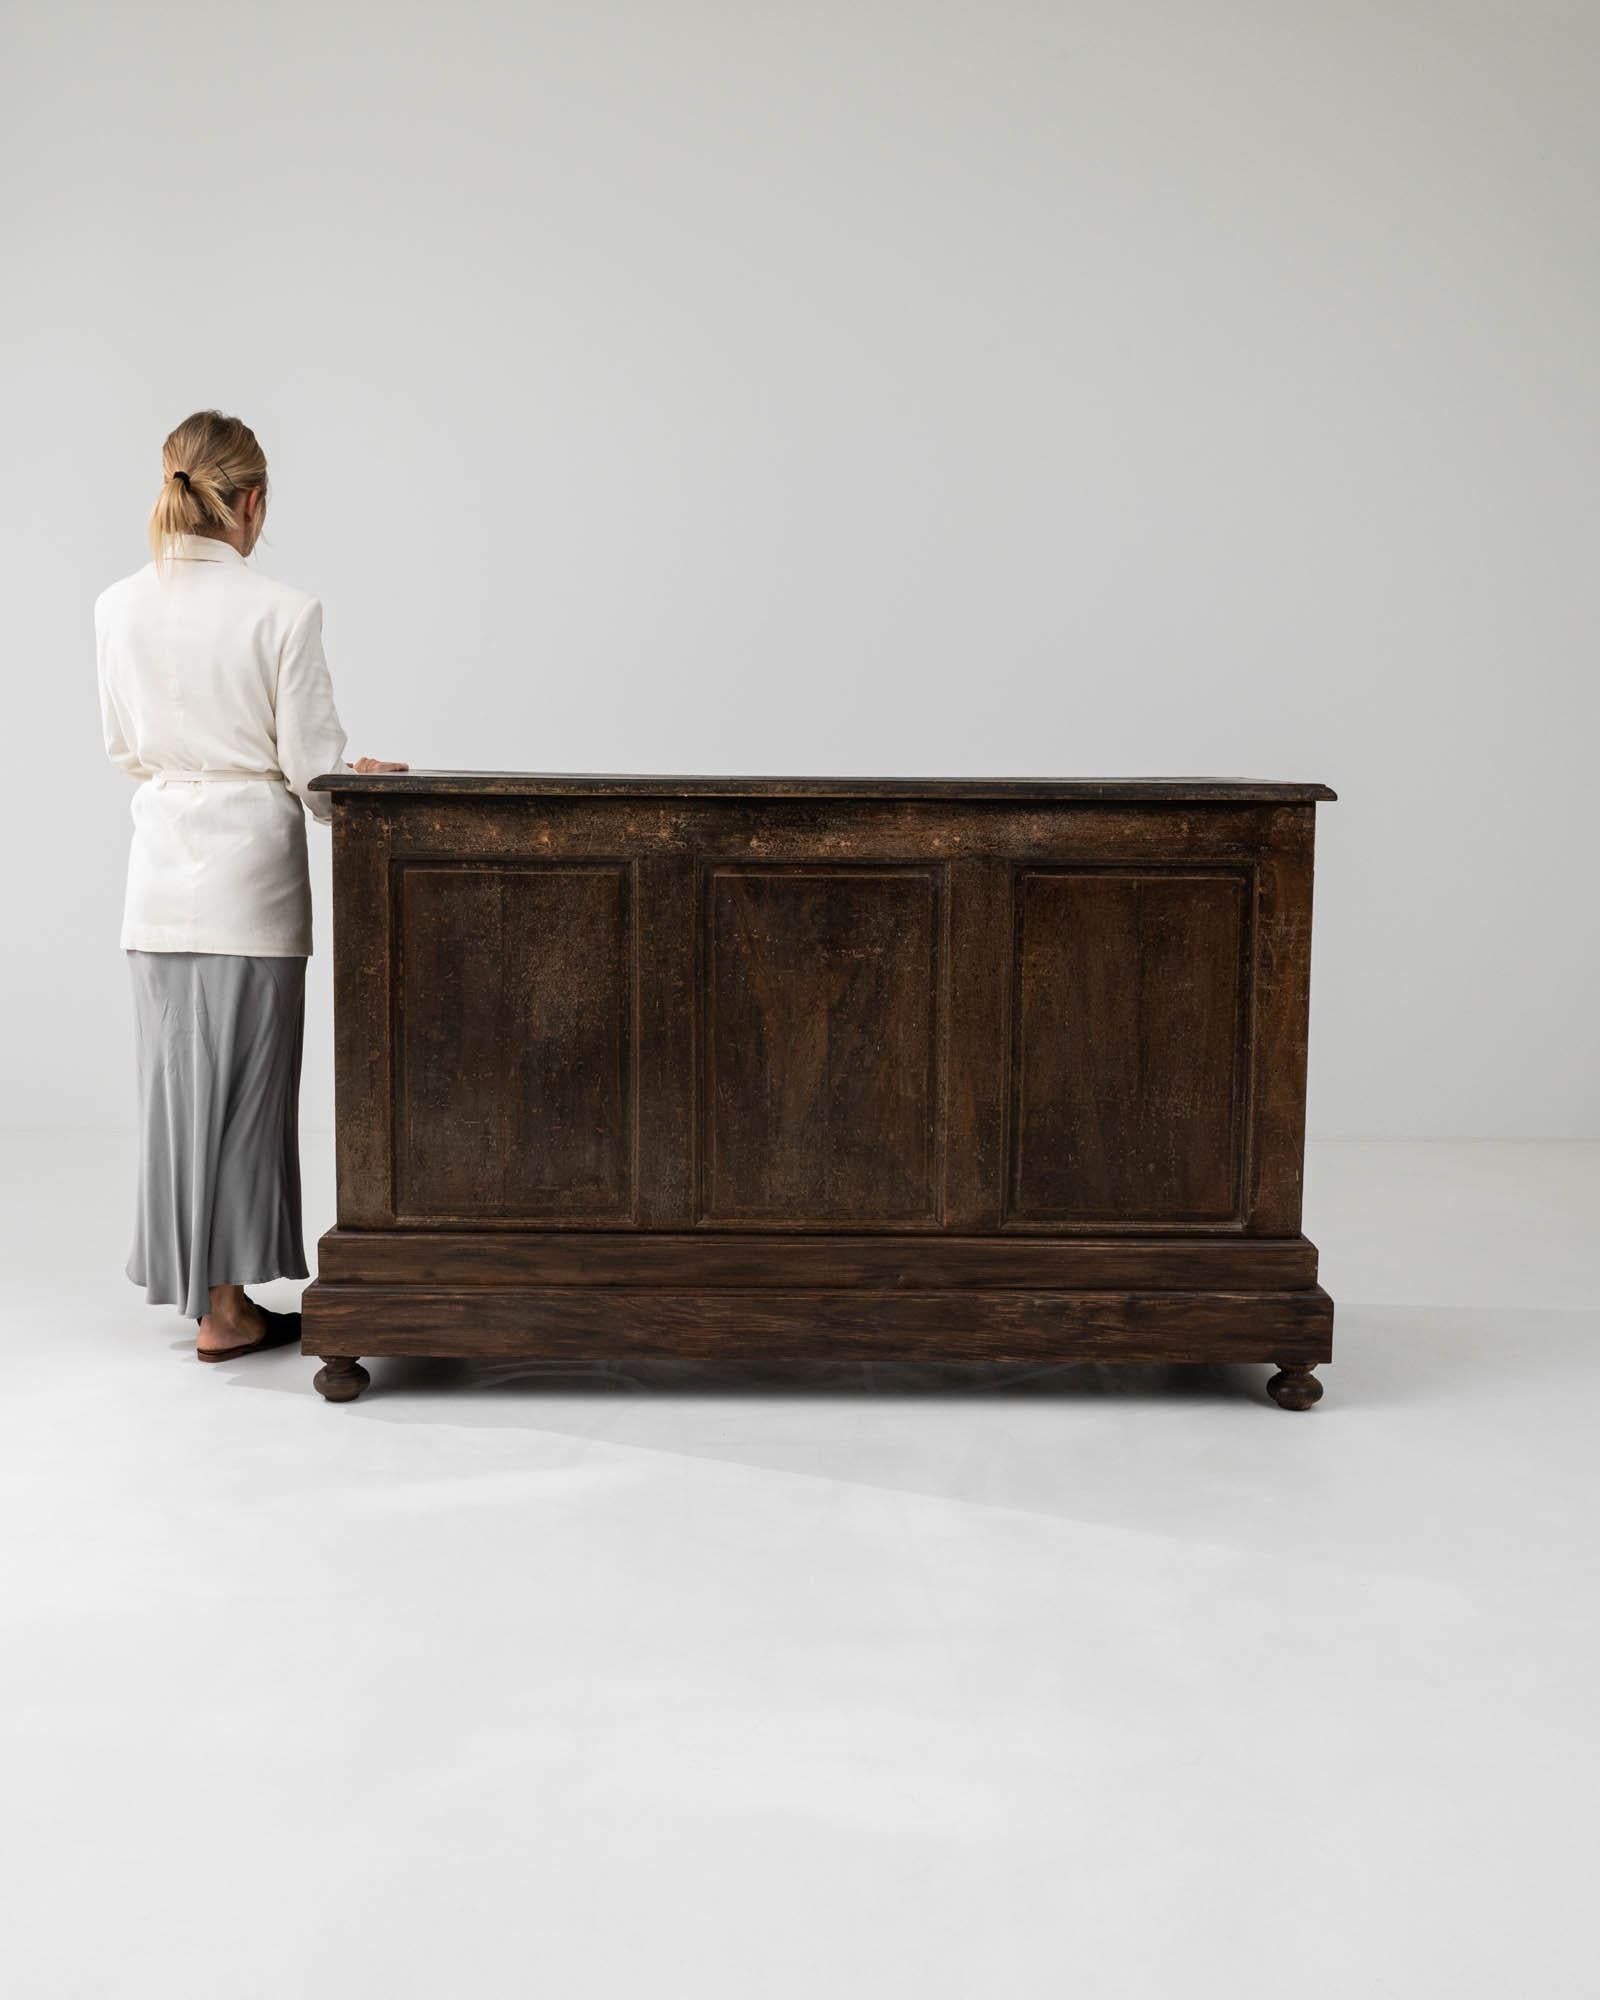 French Provincial 19th Century French Wooden Shop Counter